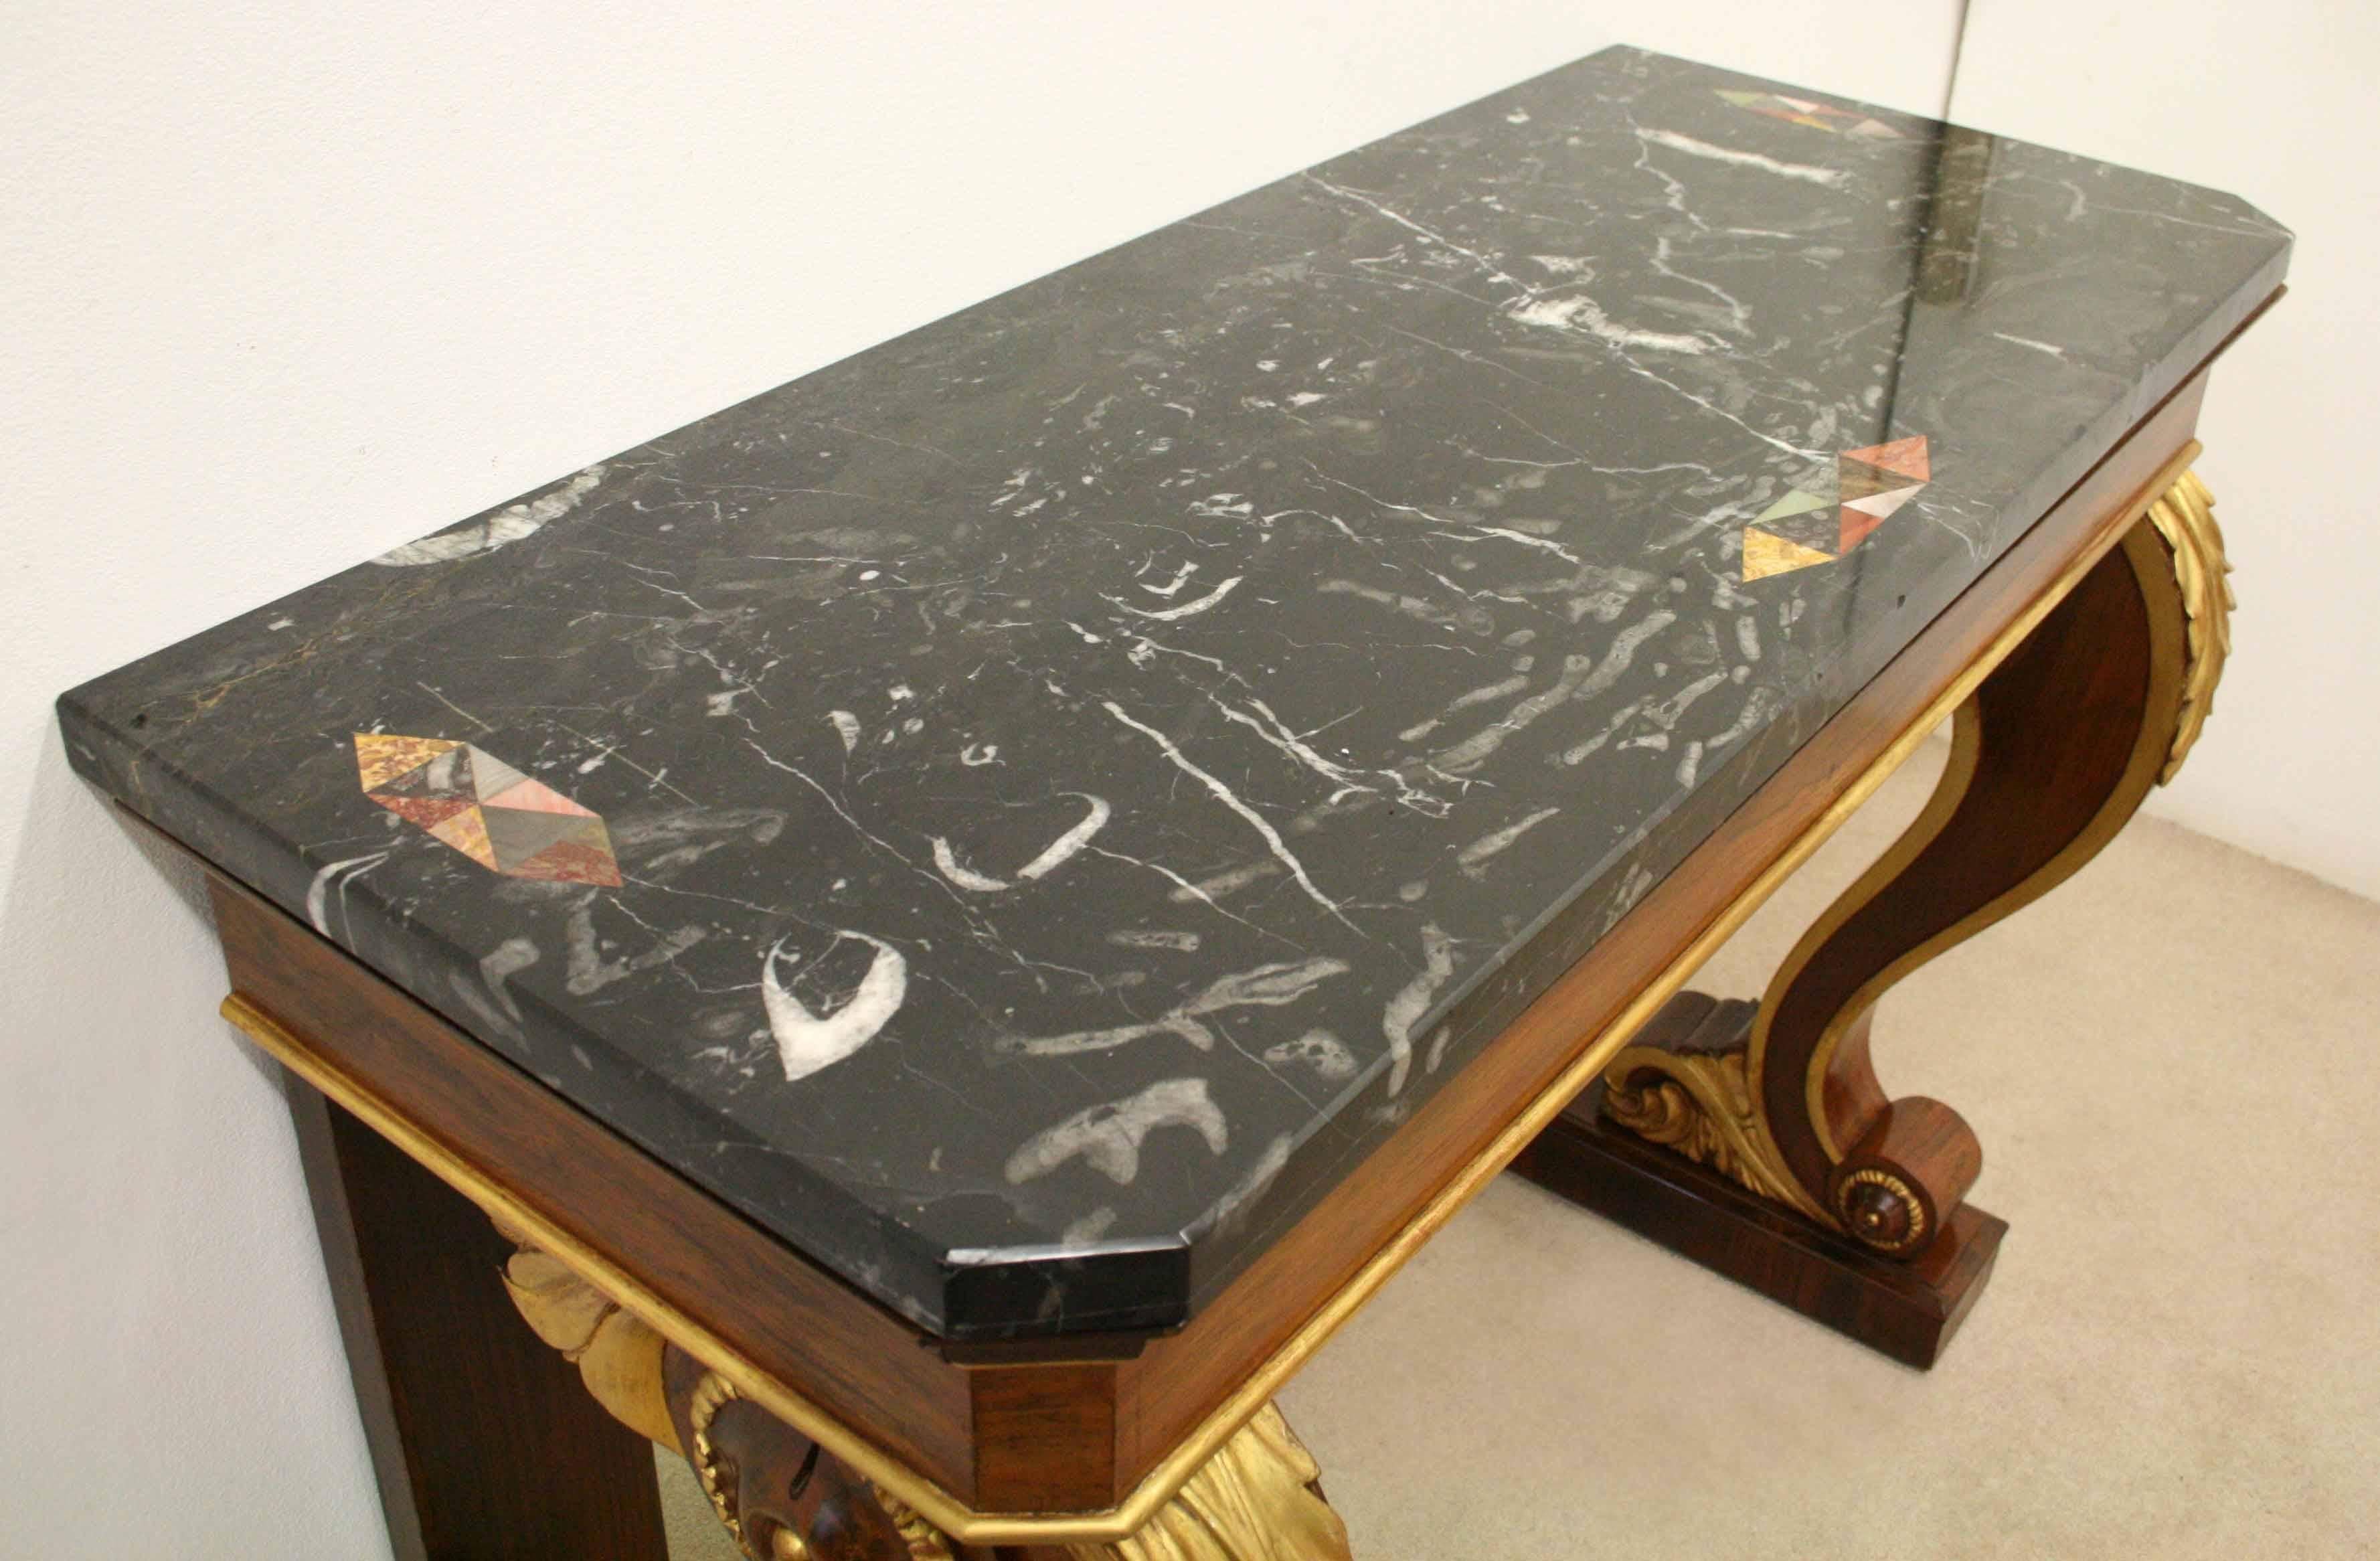 Very unusual and stylish marble topped rosewood and gilded console table, circa 1920. The marble top with its unusual inlaid panels on the front and sides in the form of diamonds with various semi-precious stones or marbles. Below this there is a